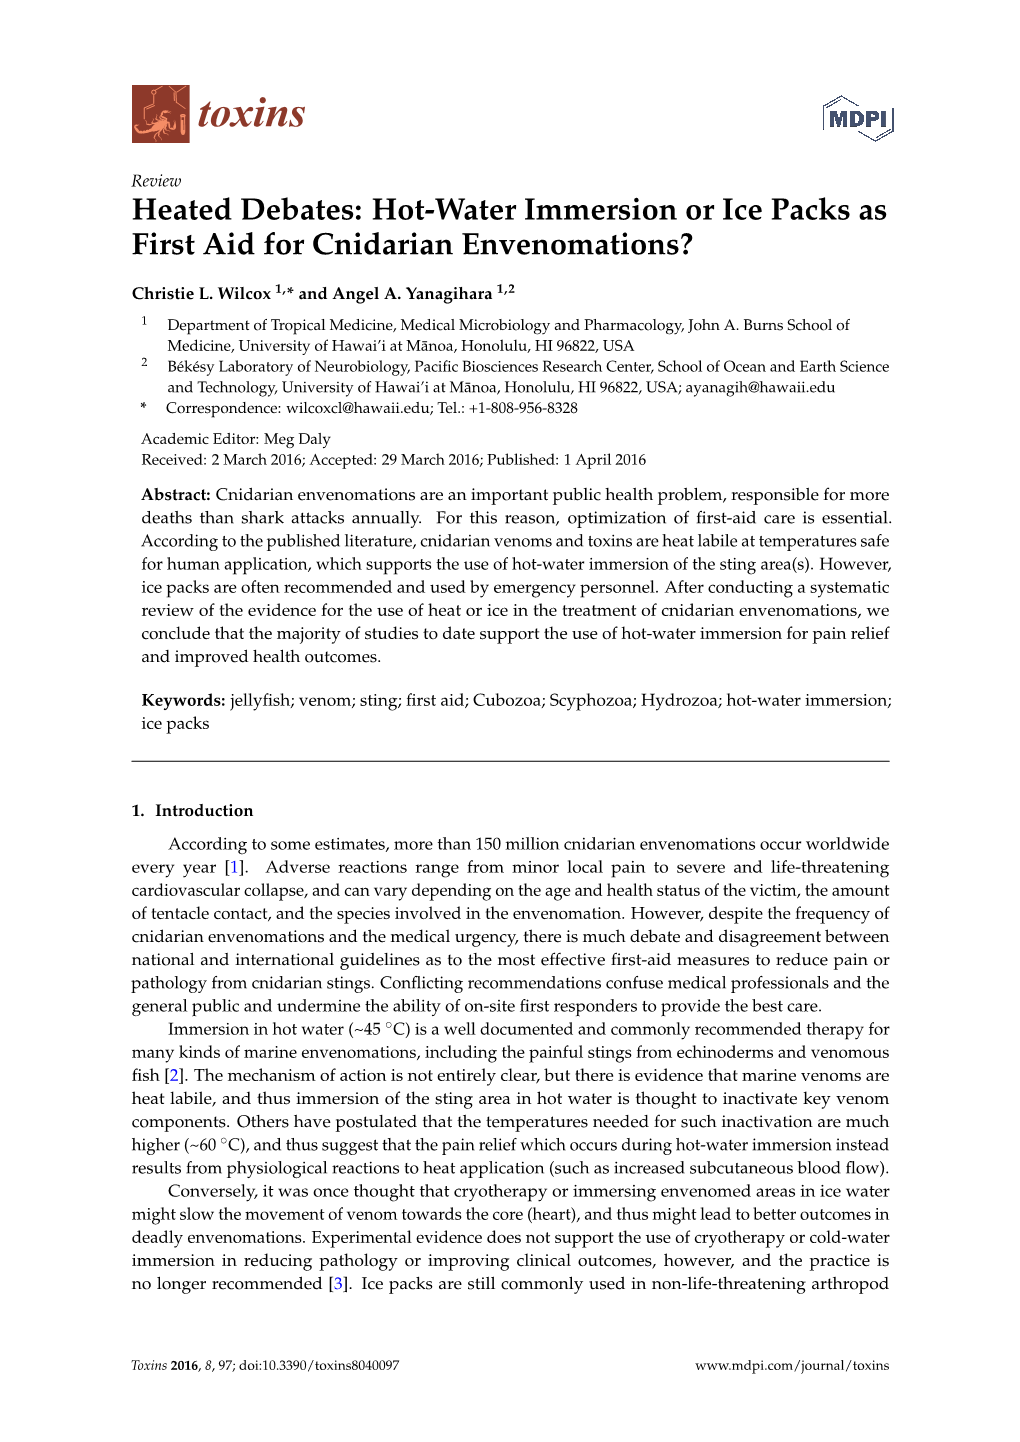 Hot-Water Immersion Or Ice Packs As First Aid for Cnidarian Envenomations?